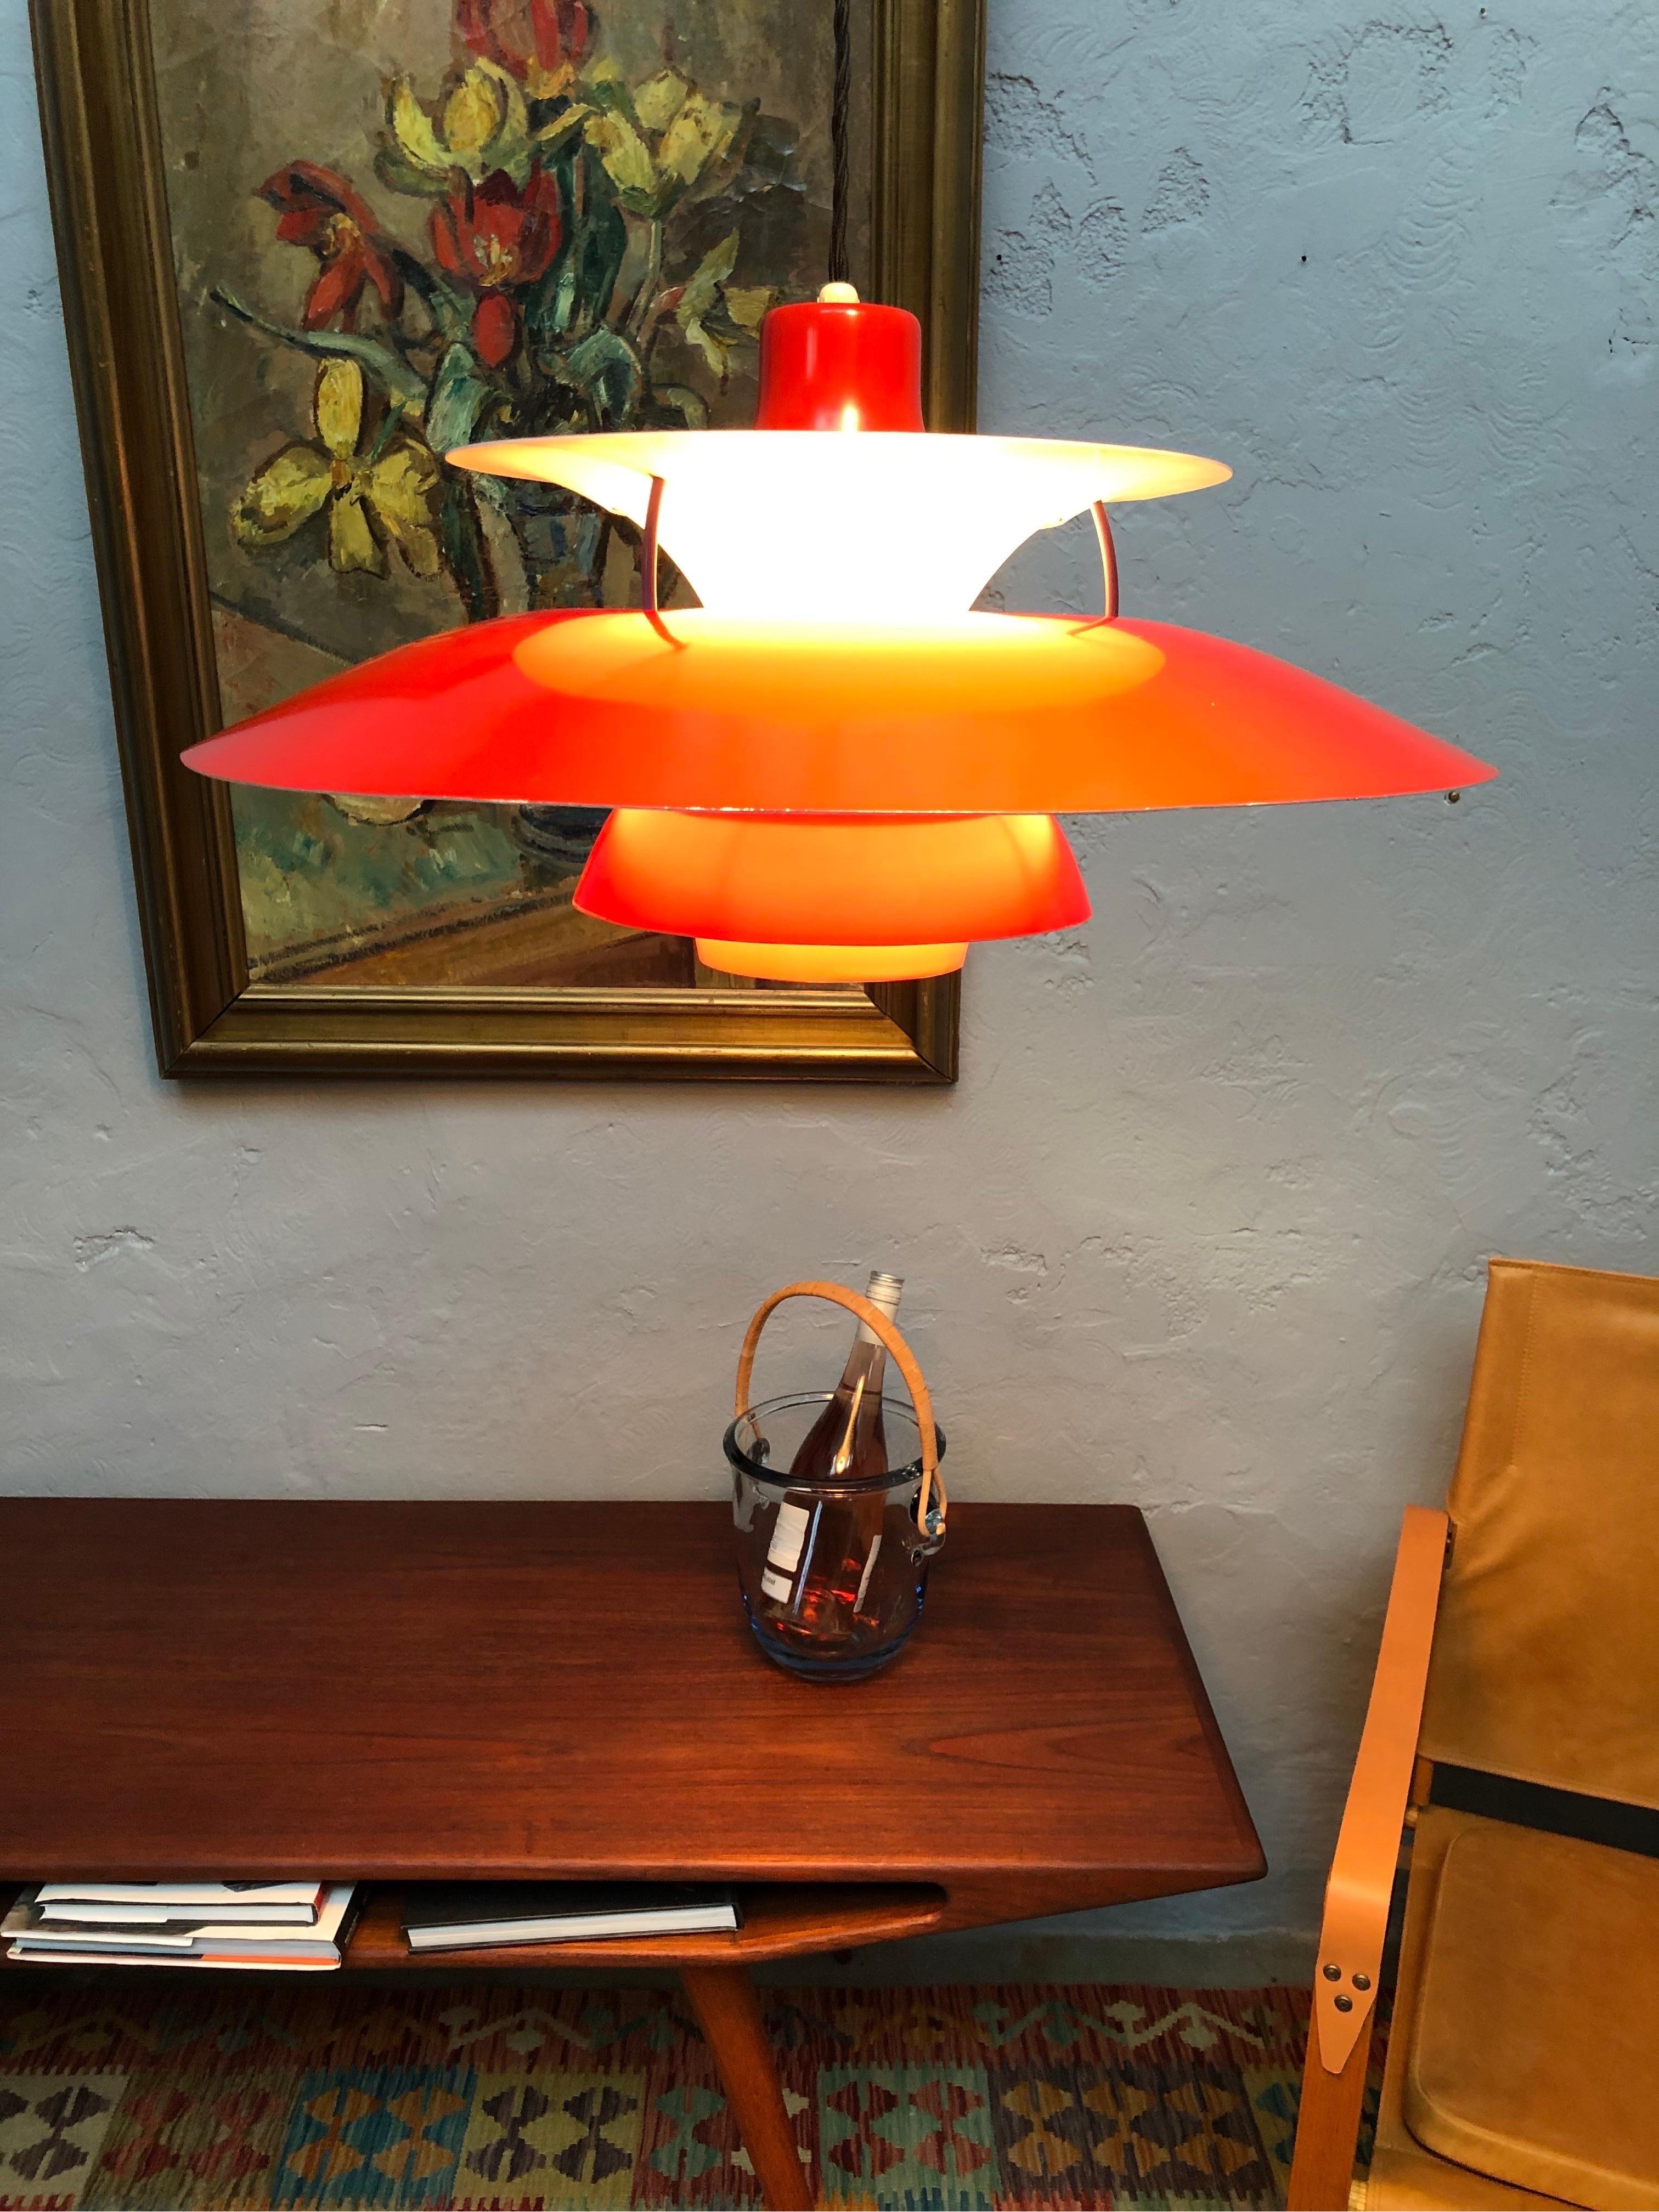 Iconic rare 1st edition vintage PH 5 chandelier pendant lamp from 1959 in red. 
Poul Henningsen designed this iconic lamp in 1958 and the launch was in September of that year at Illums Bolighus. 
This PH 5 is in great condition for its age and this